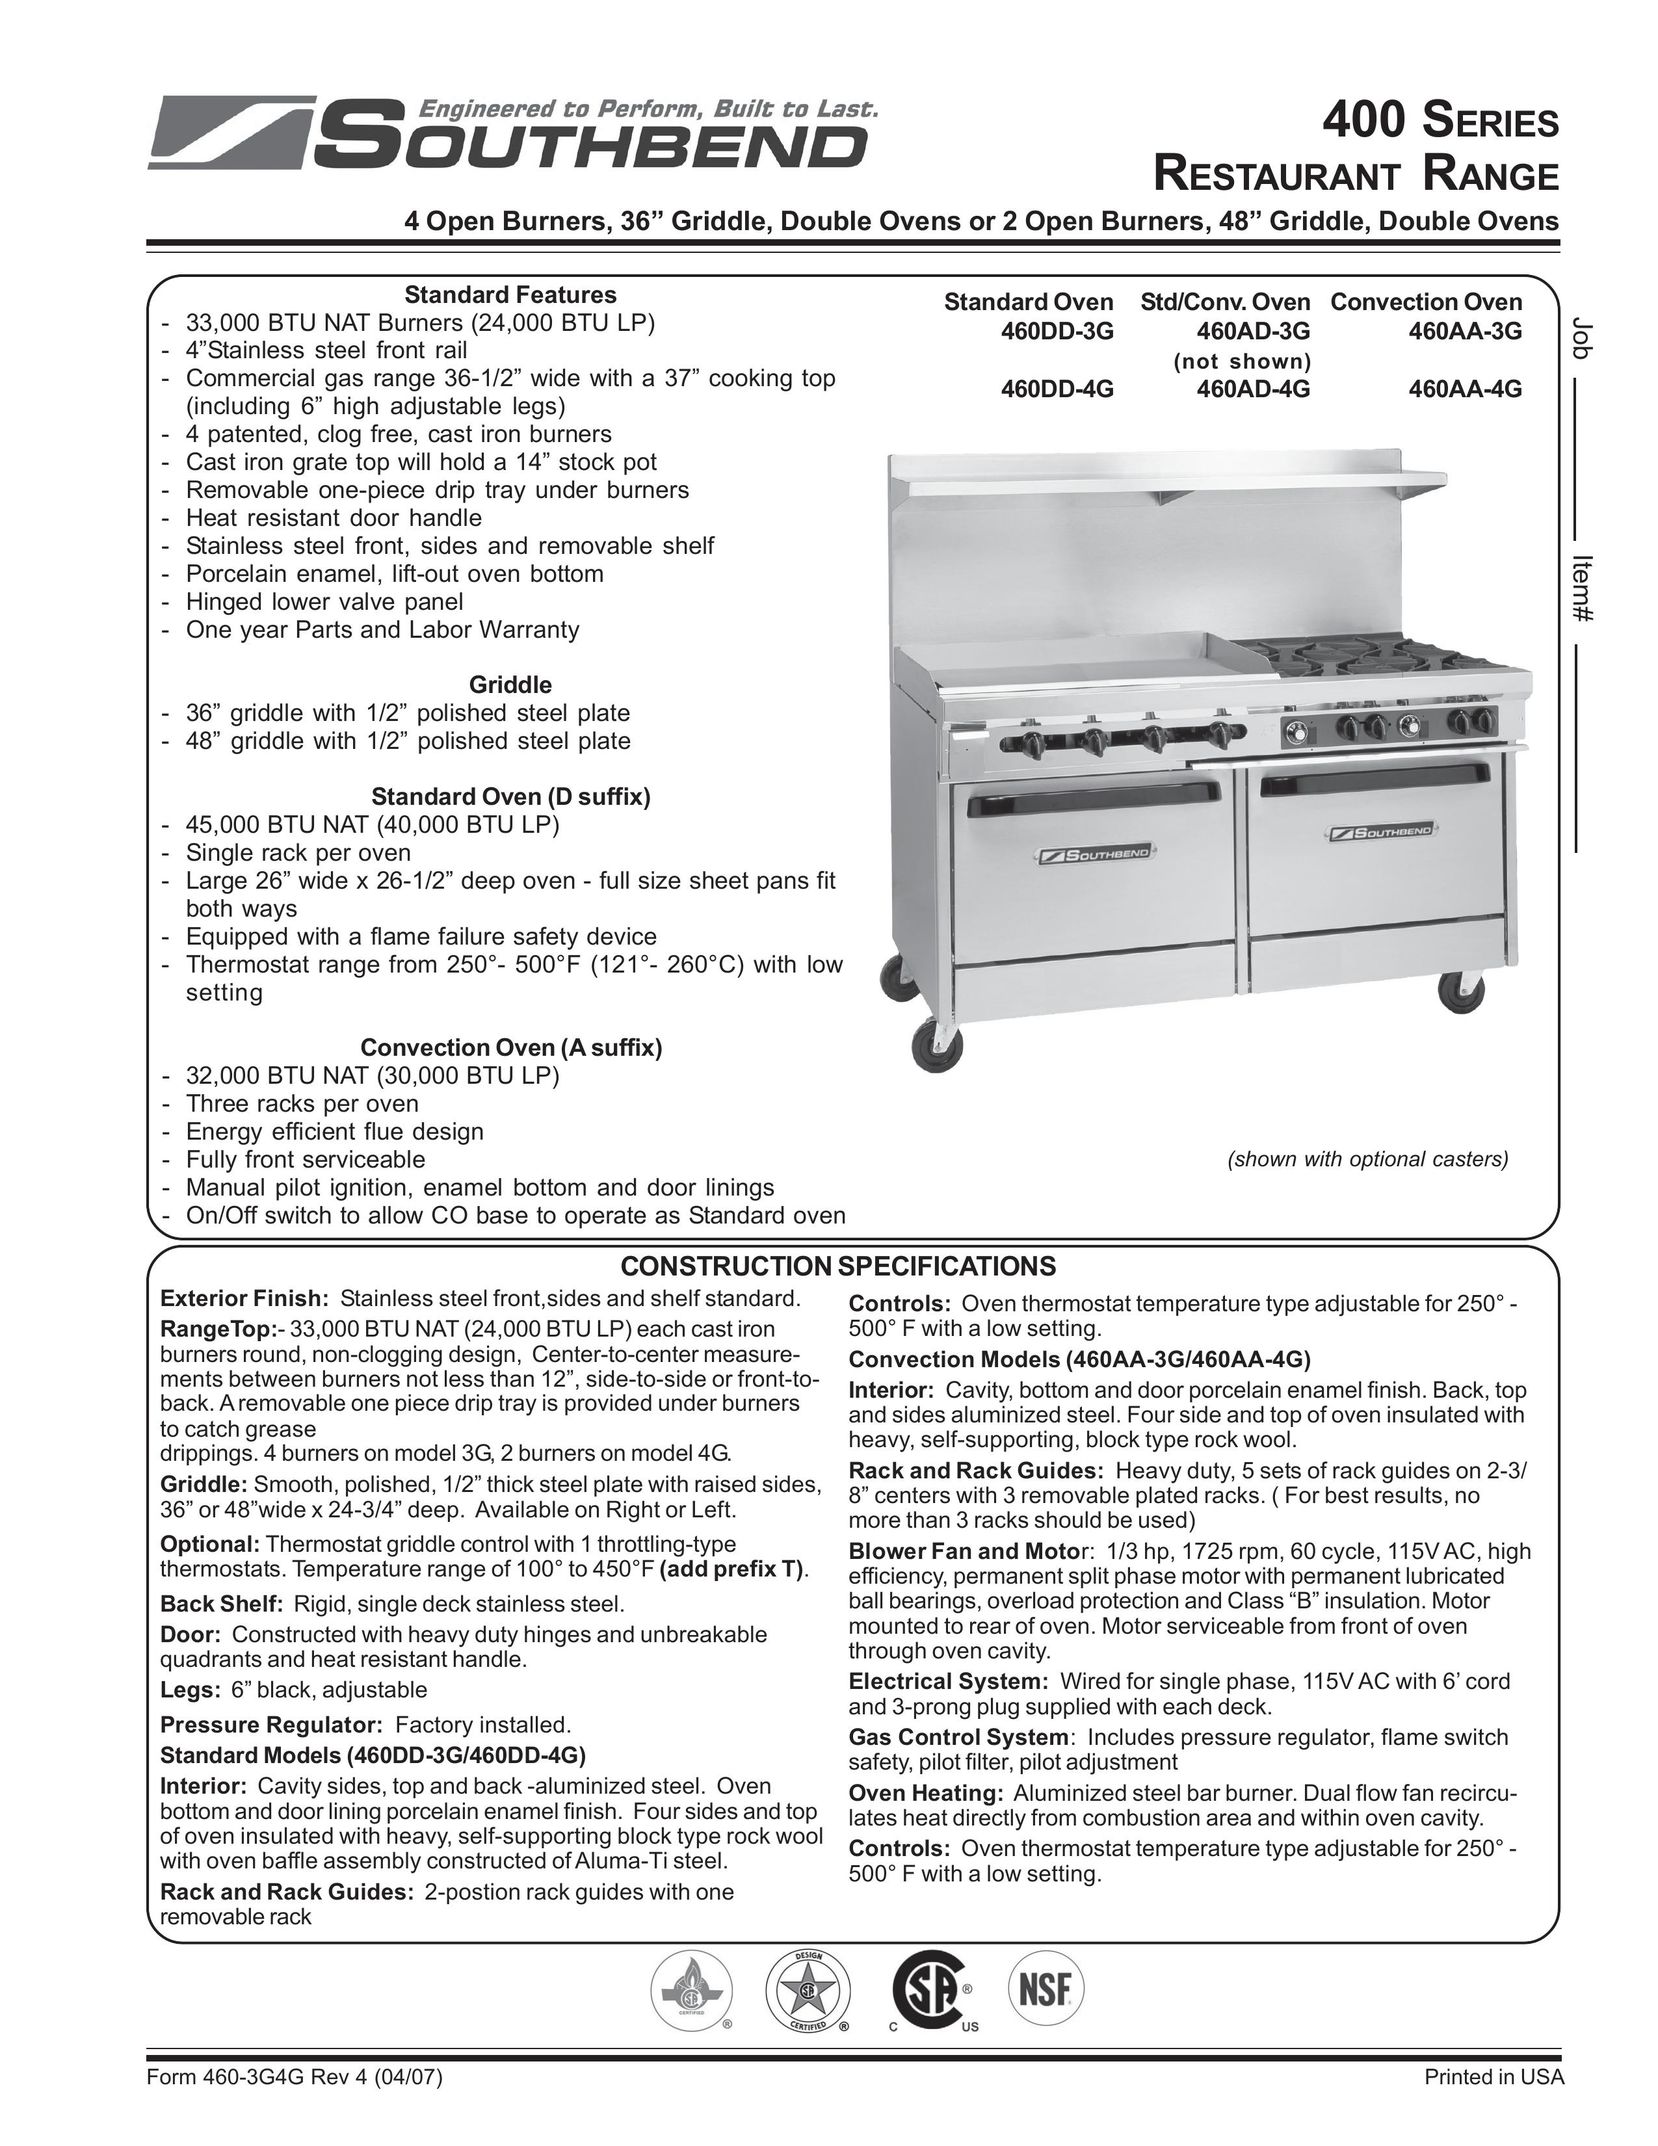 Southbend 460AA-4G Convection Oven User Manual